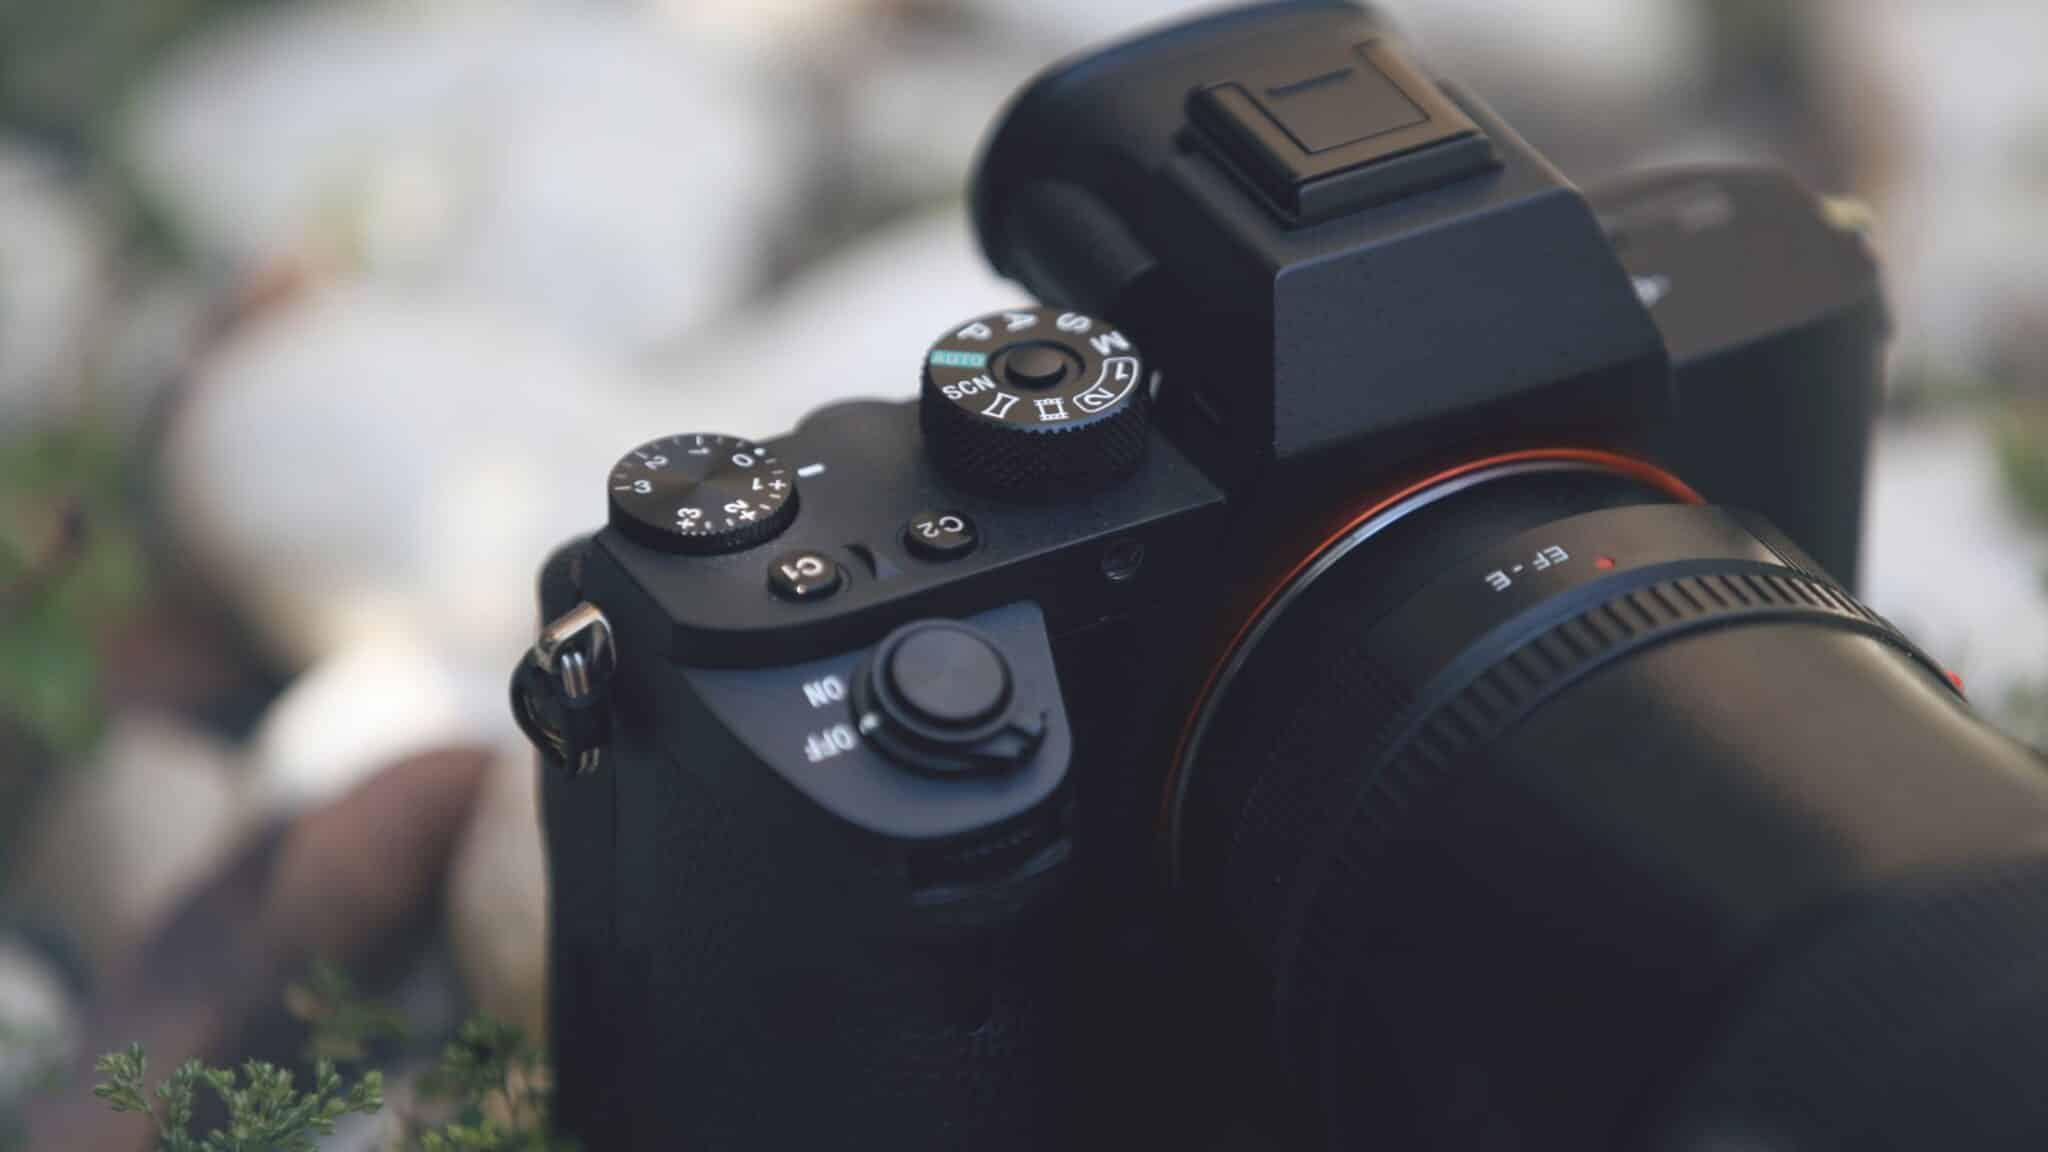 Mirrorless cameras are often favored for video because they are typically more compact and lighter, making them easier to handle for video recording.